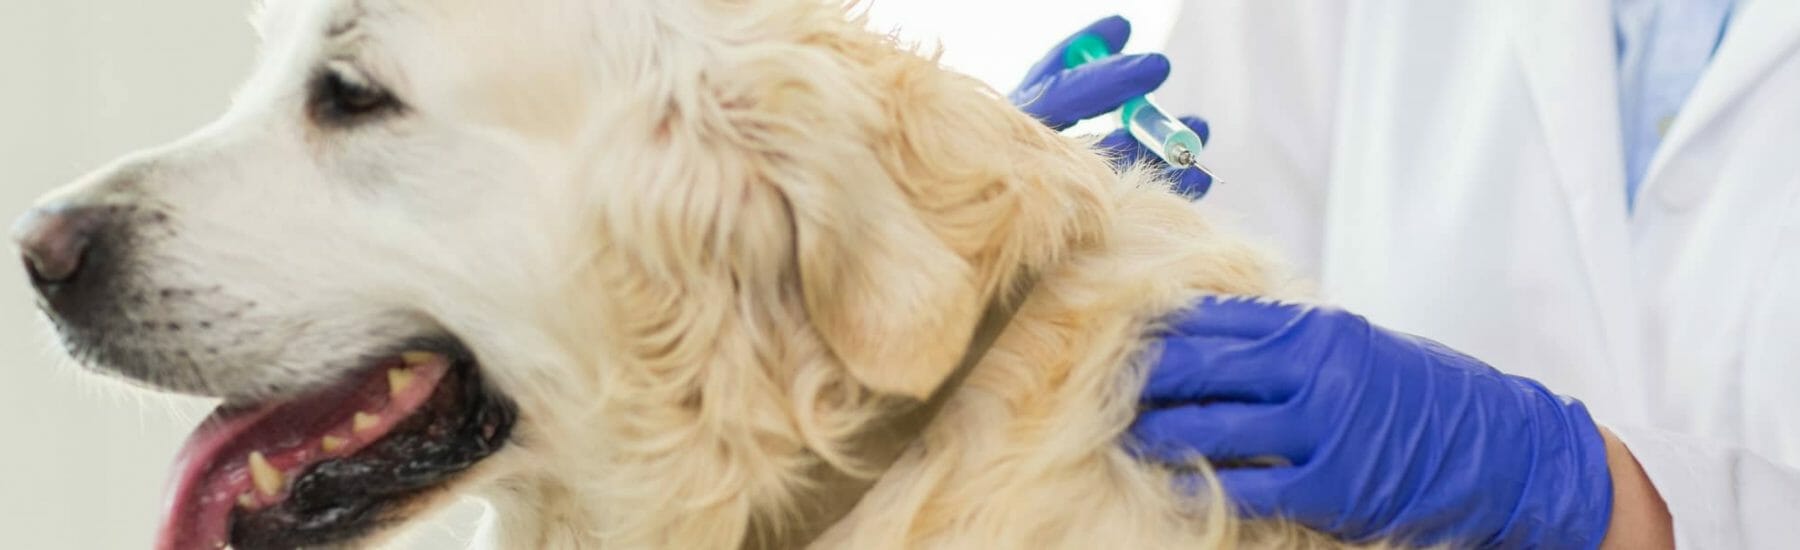 Dog getting a vaccination